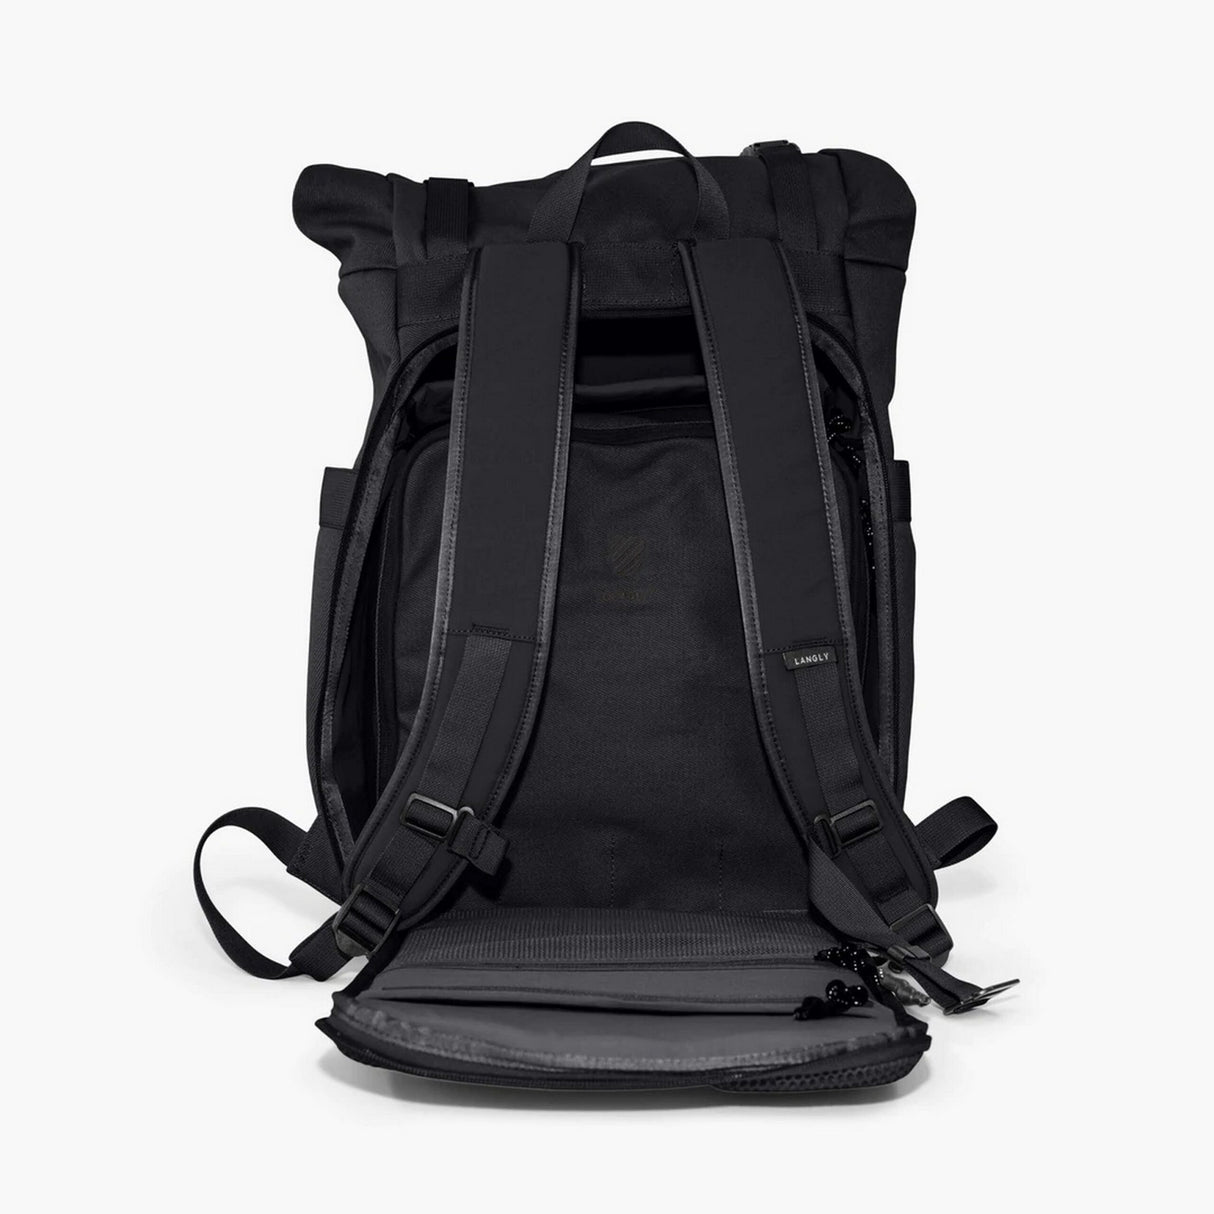 Langly Weekender Backpack With Camera Cube, Black